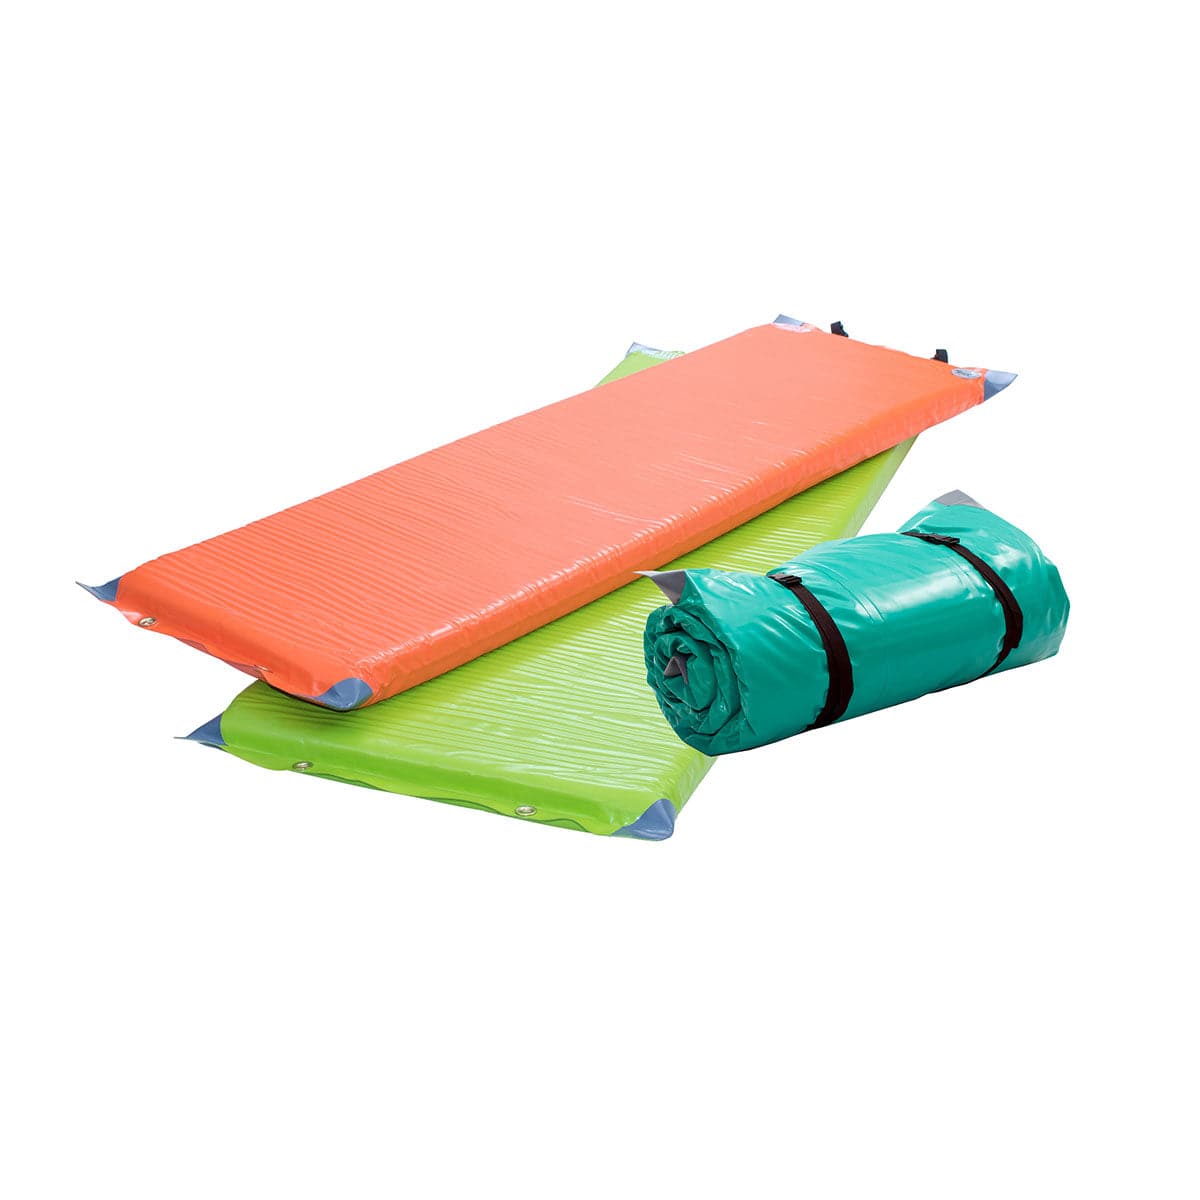 Featuring the Landing Pad Sleeping Pads paco pad, sleep pad manufactured by AIRE shown here from one angle.